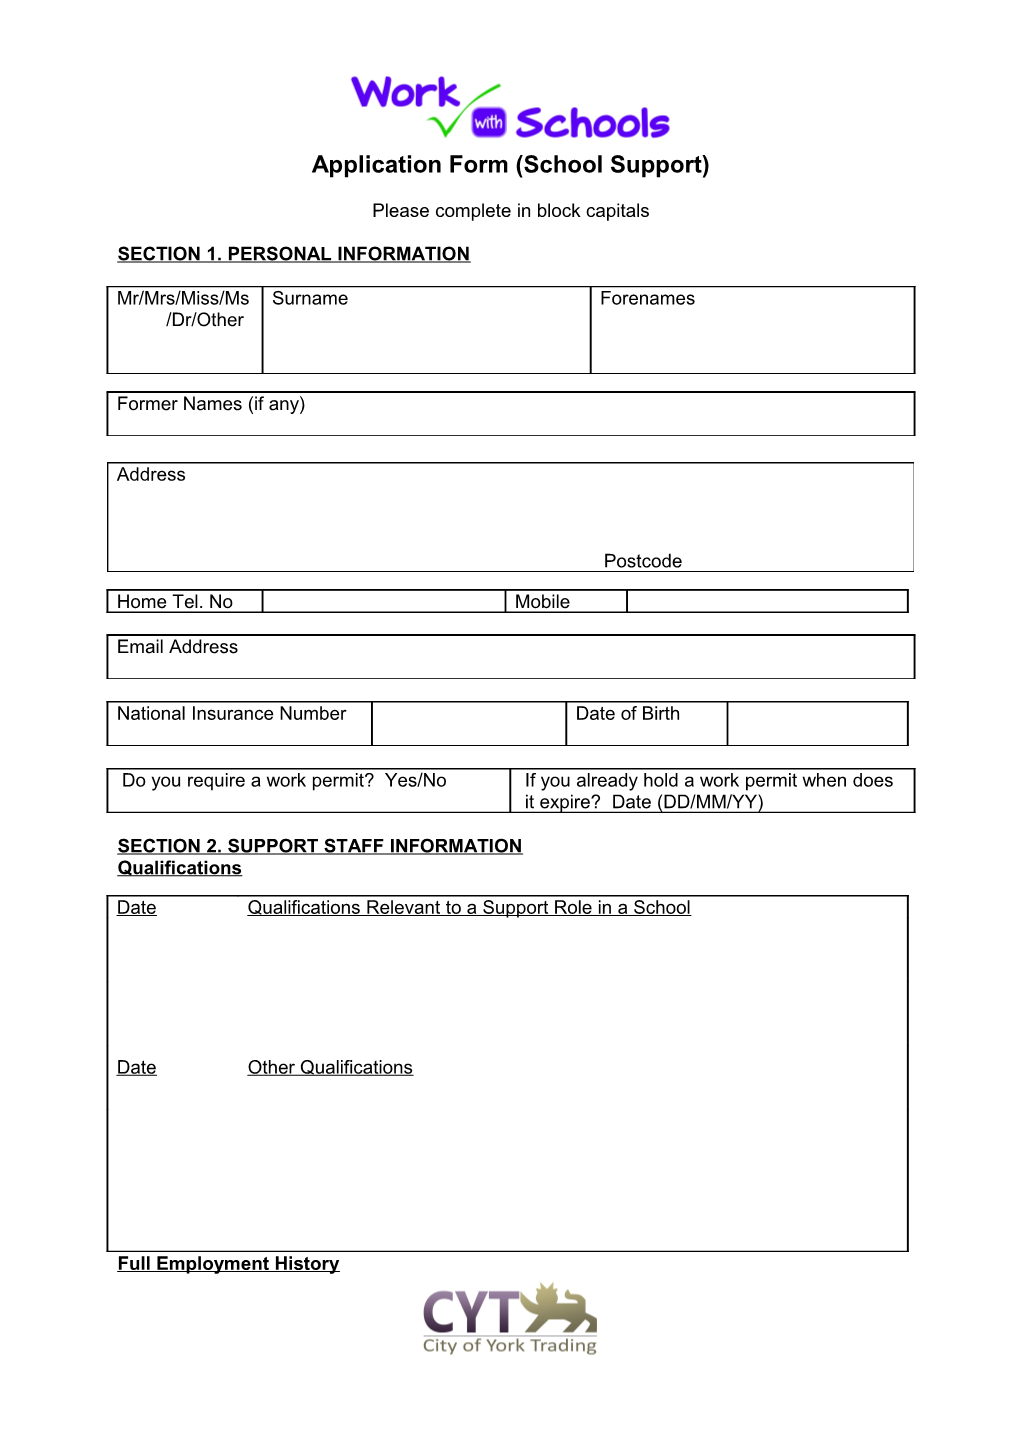 Application Form for City of York Supply Agency